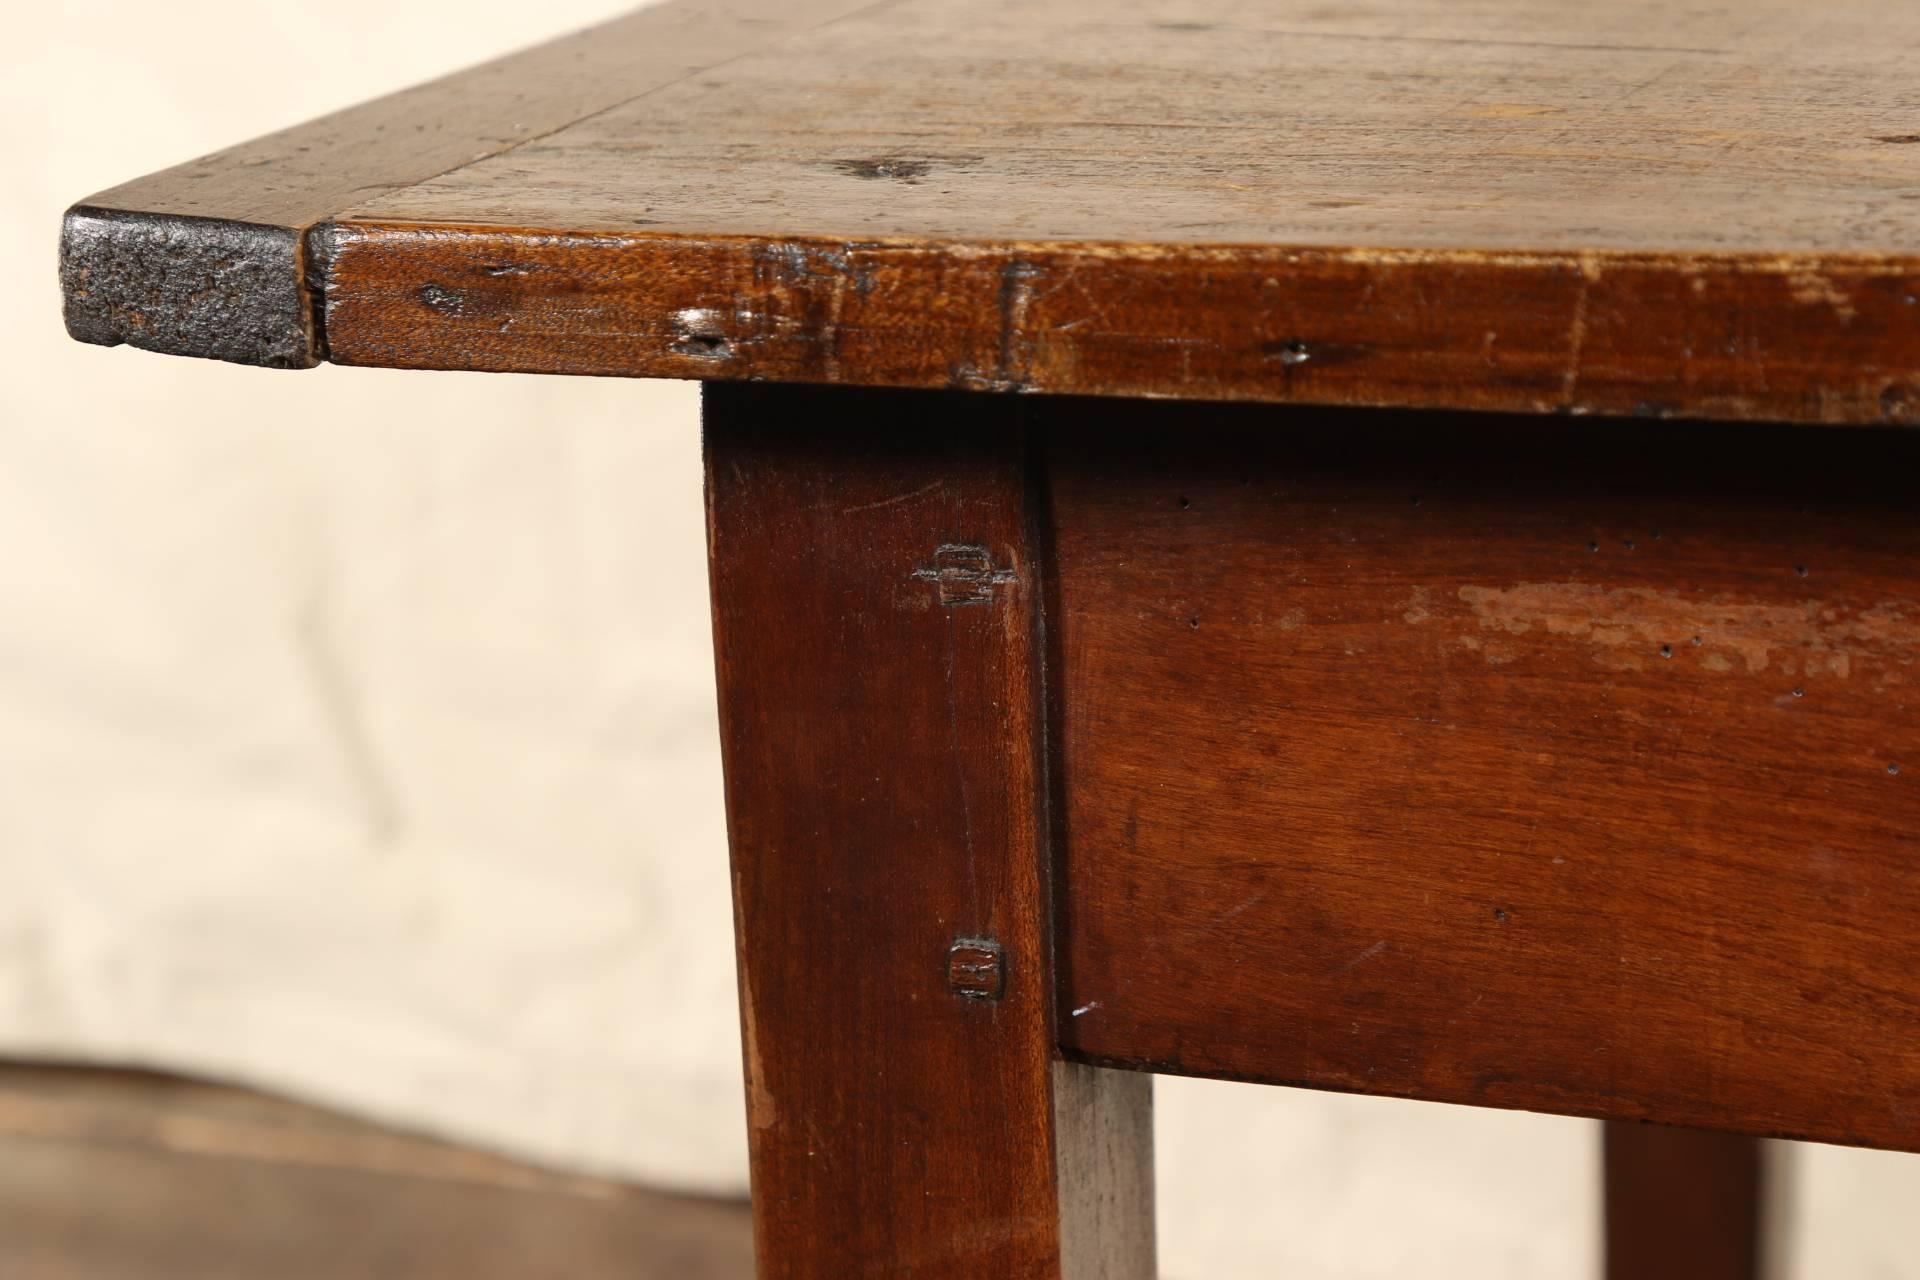 Rectangular with a single off-centre apron drawer with turned knob. Raised on squared tapering legs. Dowel construction.
Condition: wear to the finish and gouges on the top as expected with age and use.